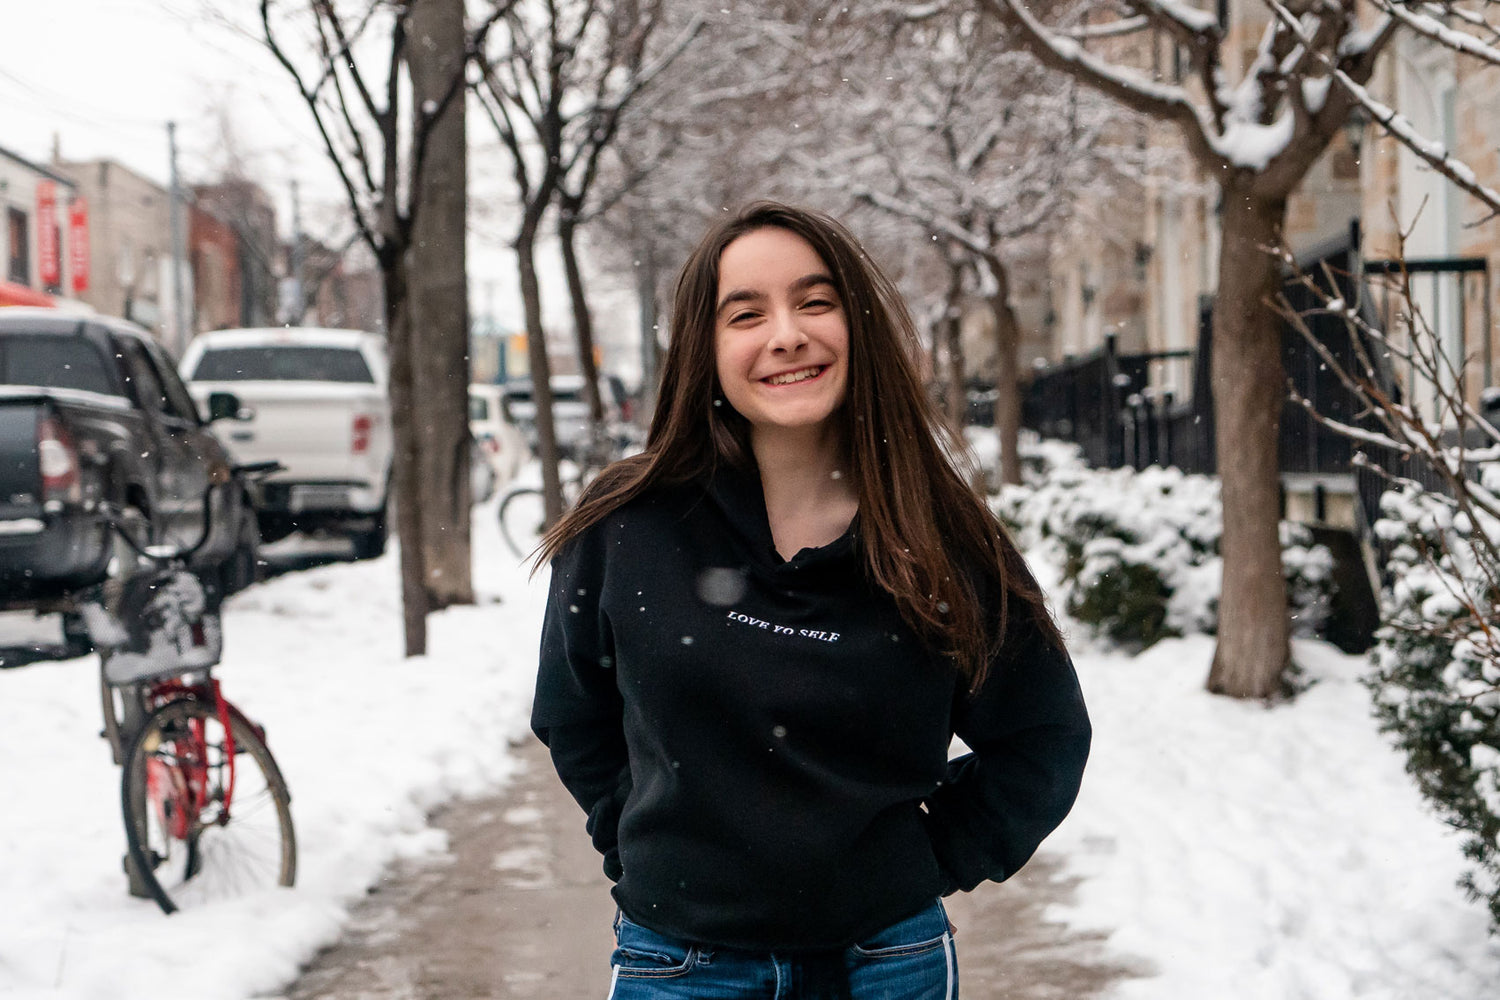 Meet Hannah Alper: The 16 year old who is paving the way for the younger generation of activists